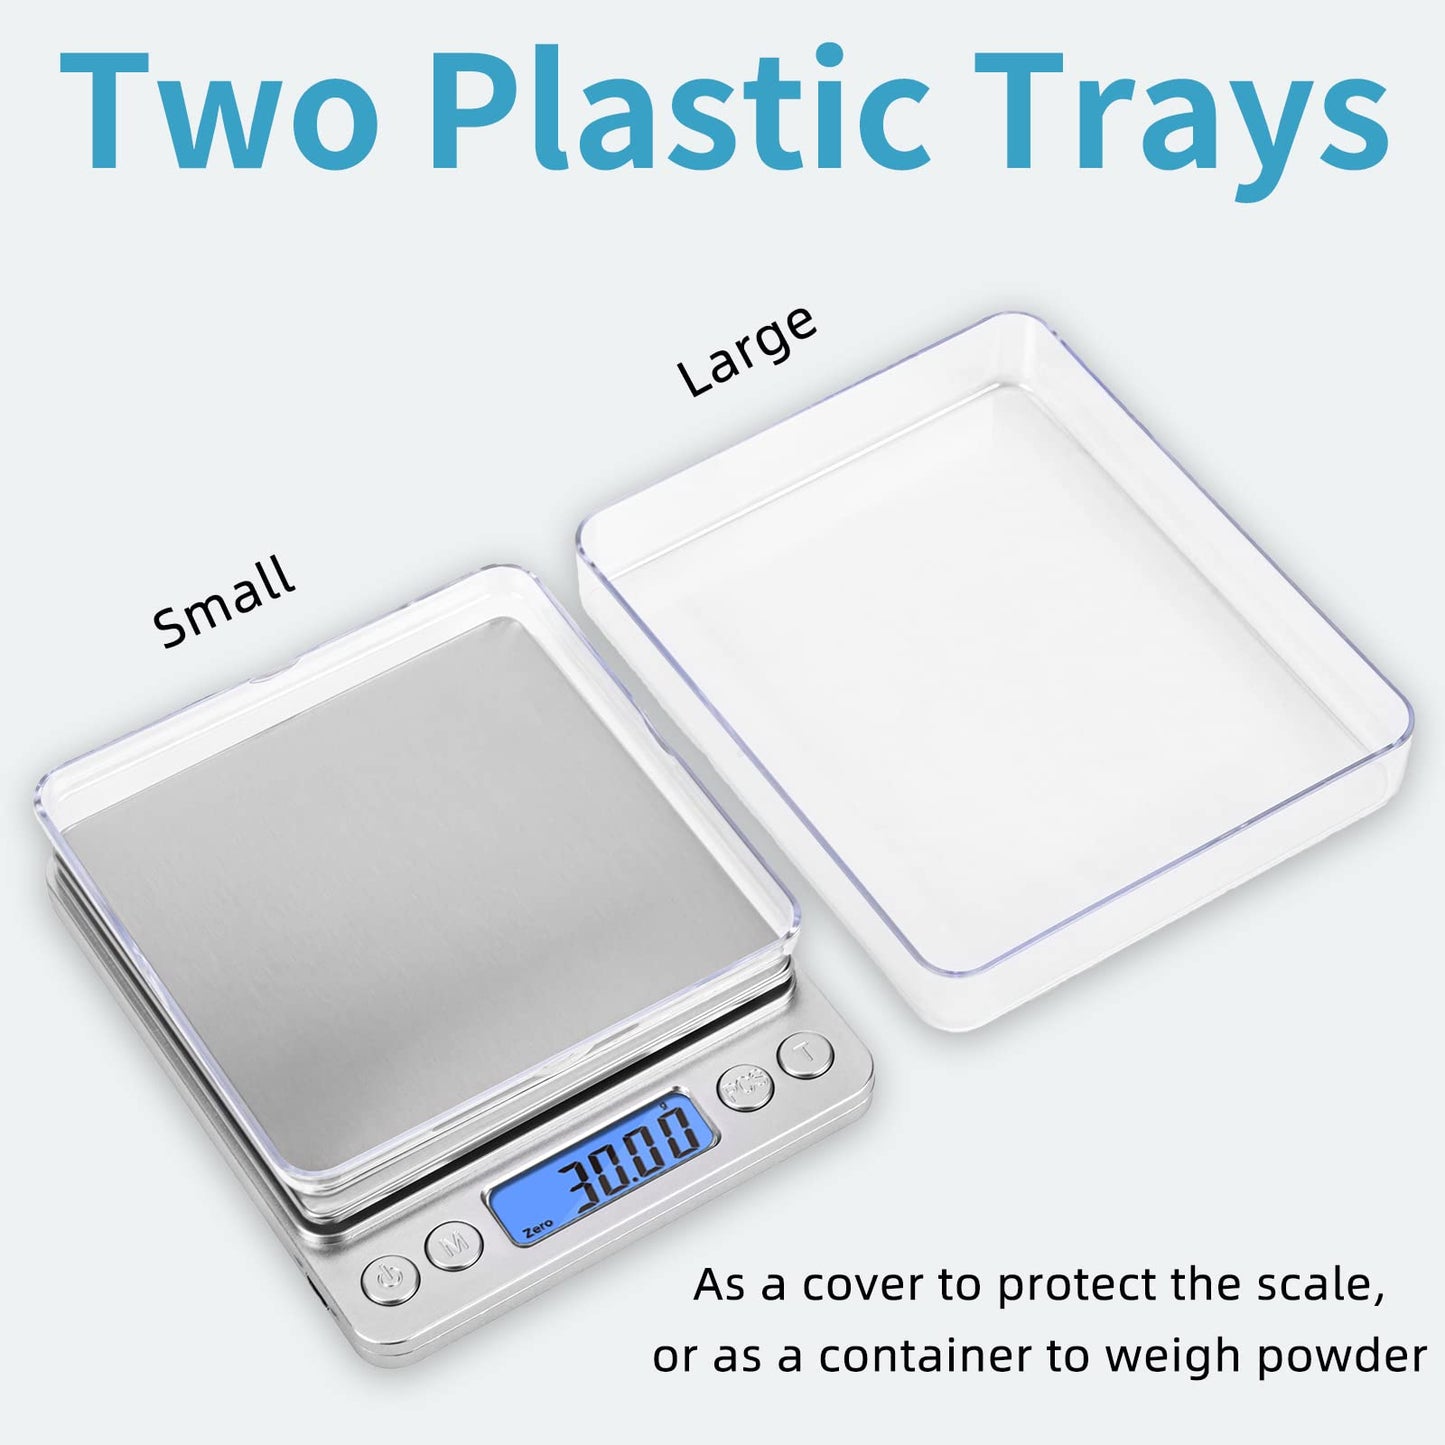 NEXT-SHINE Gram Scale Digital Mini Pocket Pro Size Rechargeable Portable Scale 500g x 0.01g with Stainless Steel USB Charged for Coffee Beans Jewelry Small Postal Parcel Baking Cooking